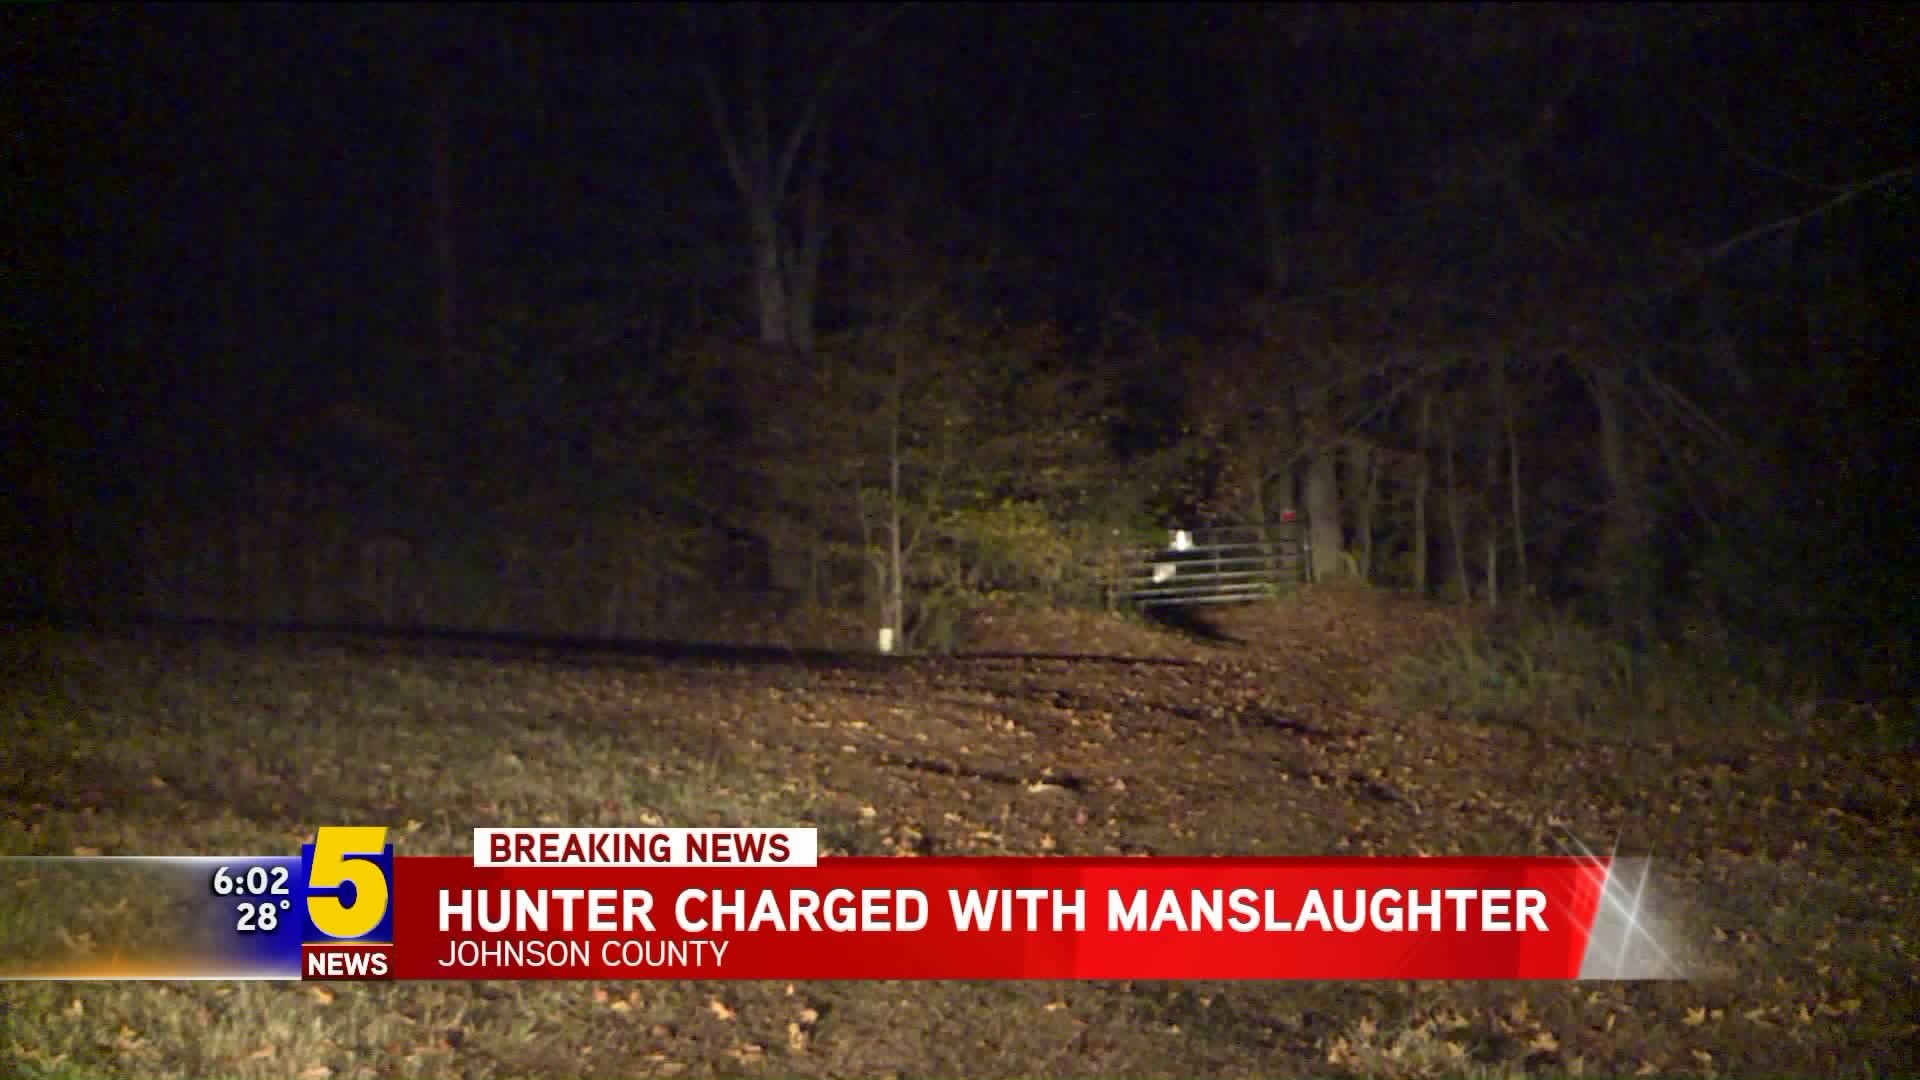 Hunter Charged With Manslaughter For Hunting Accident In Johnson County